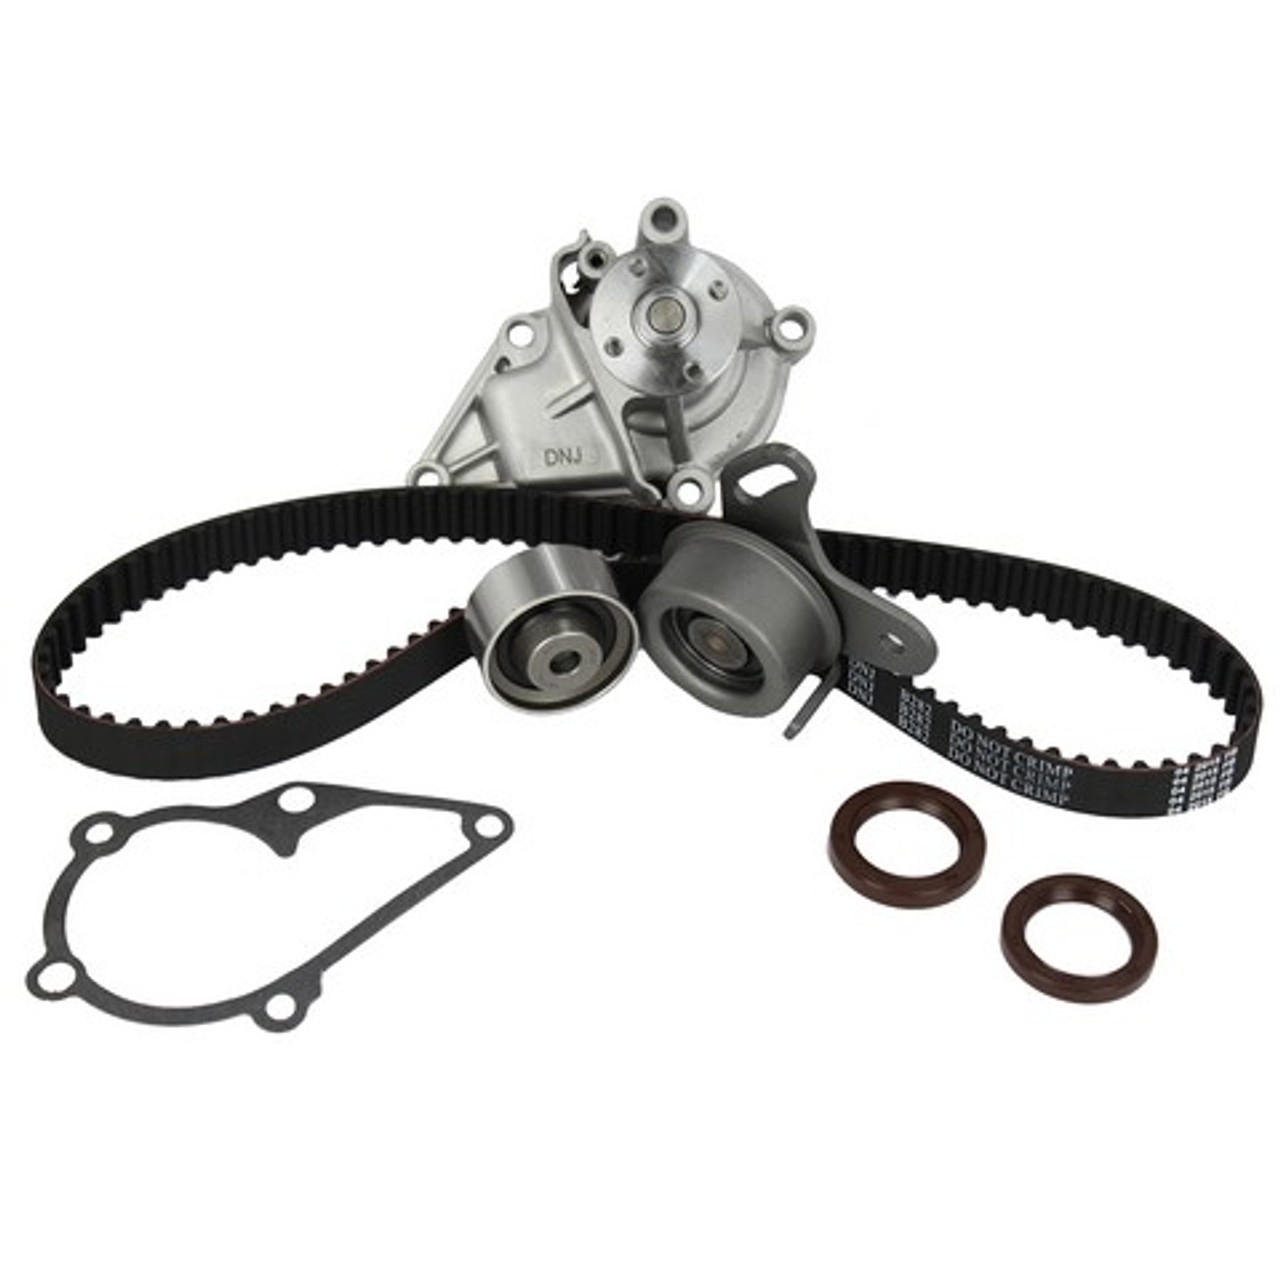 2002 Hyundai Accent 1.6L Timing Belt Kit with Water Pump TBK122WP.E4